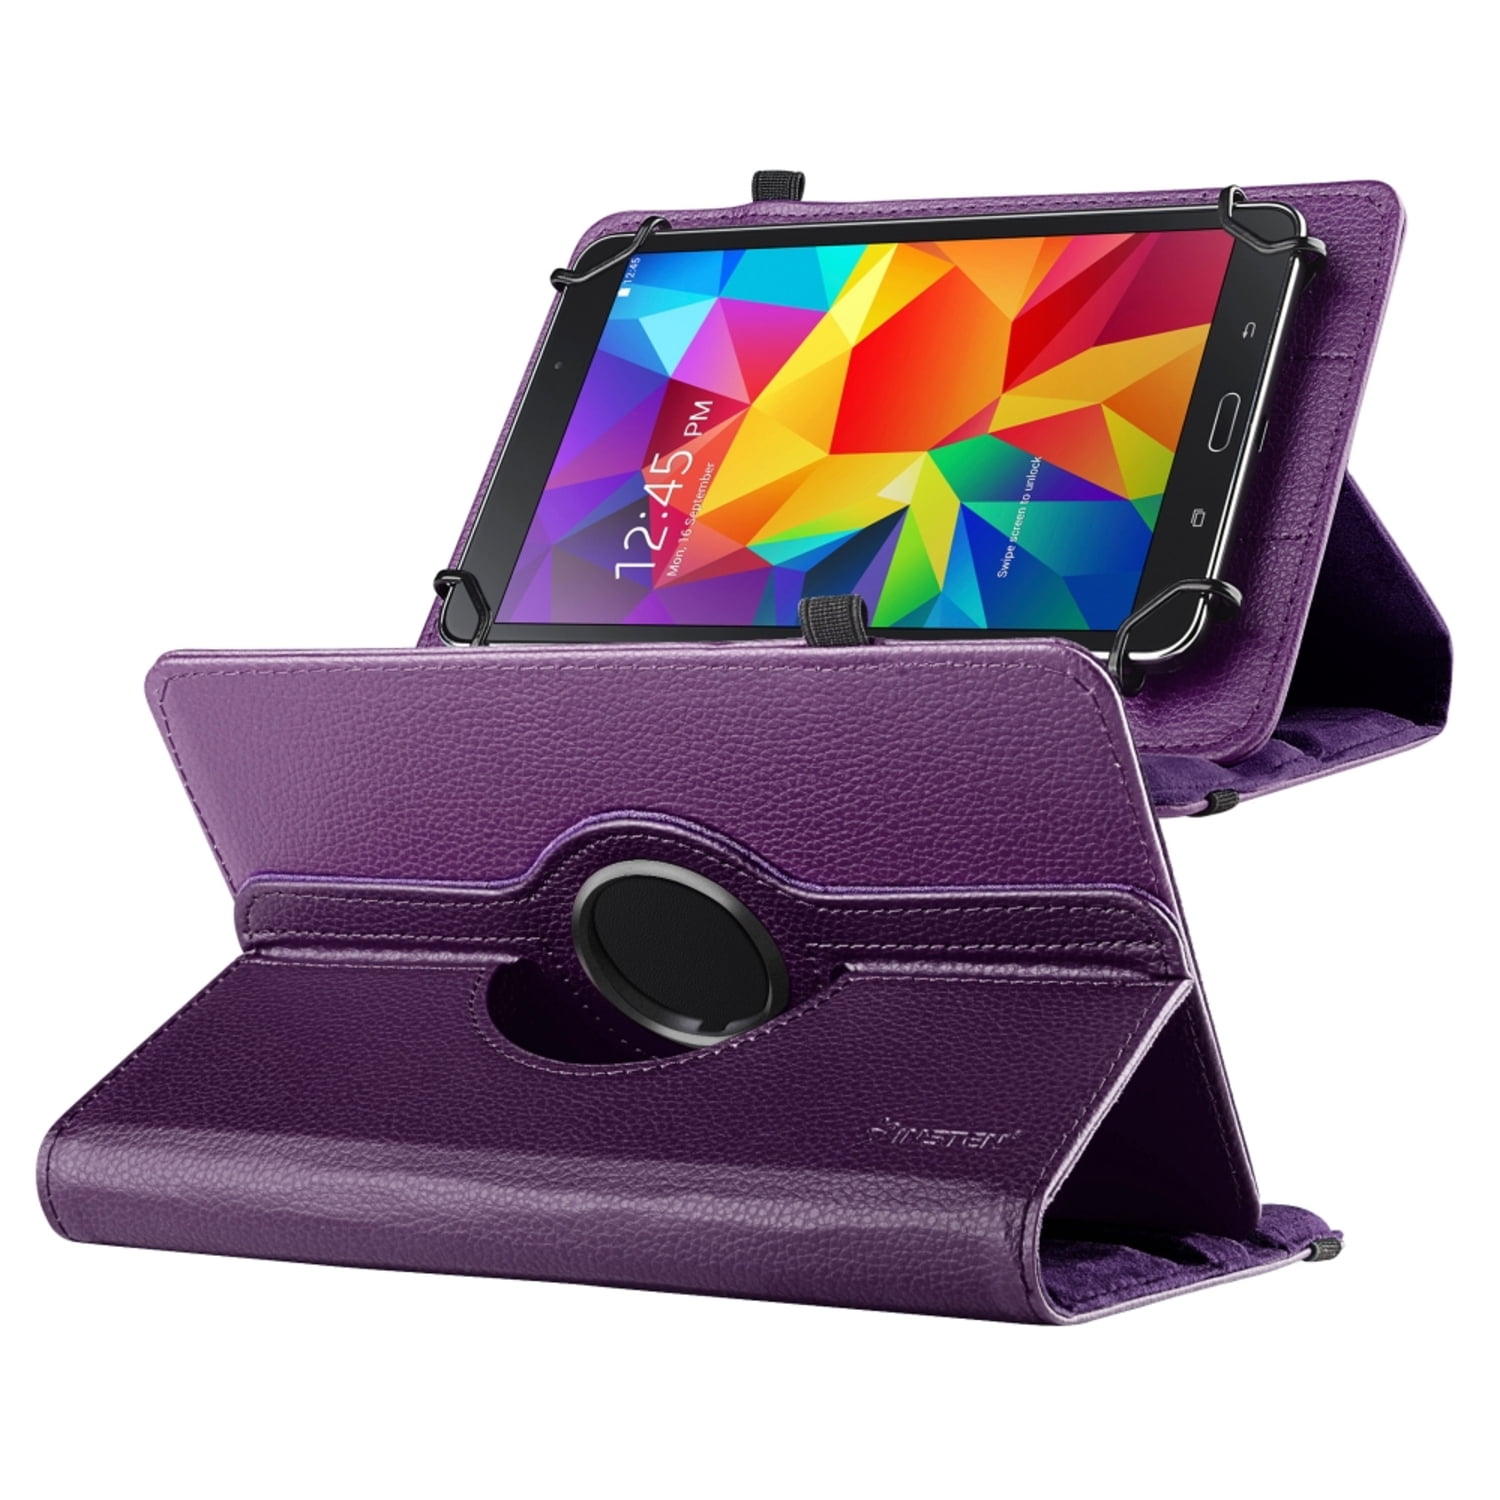 Insten Universal 7 Inch Tablet Leather Case With Stand For Visual